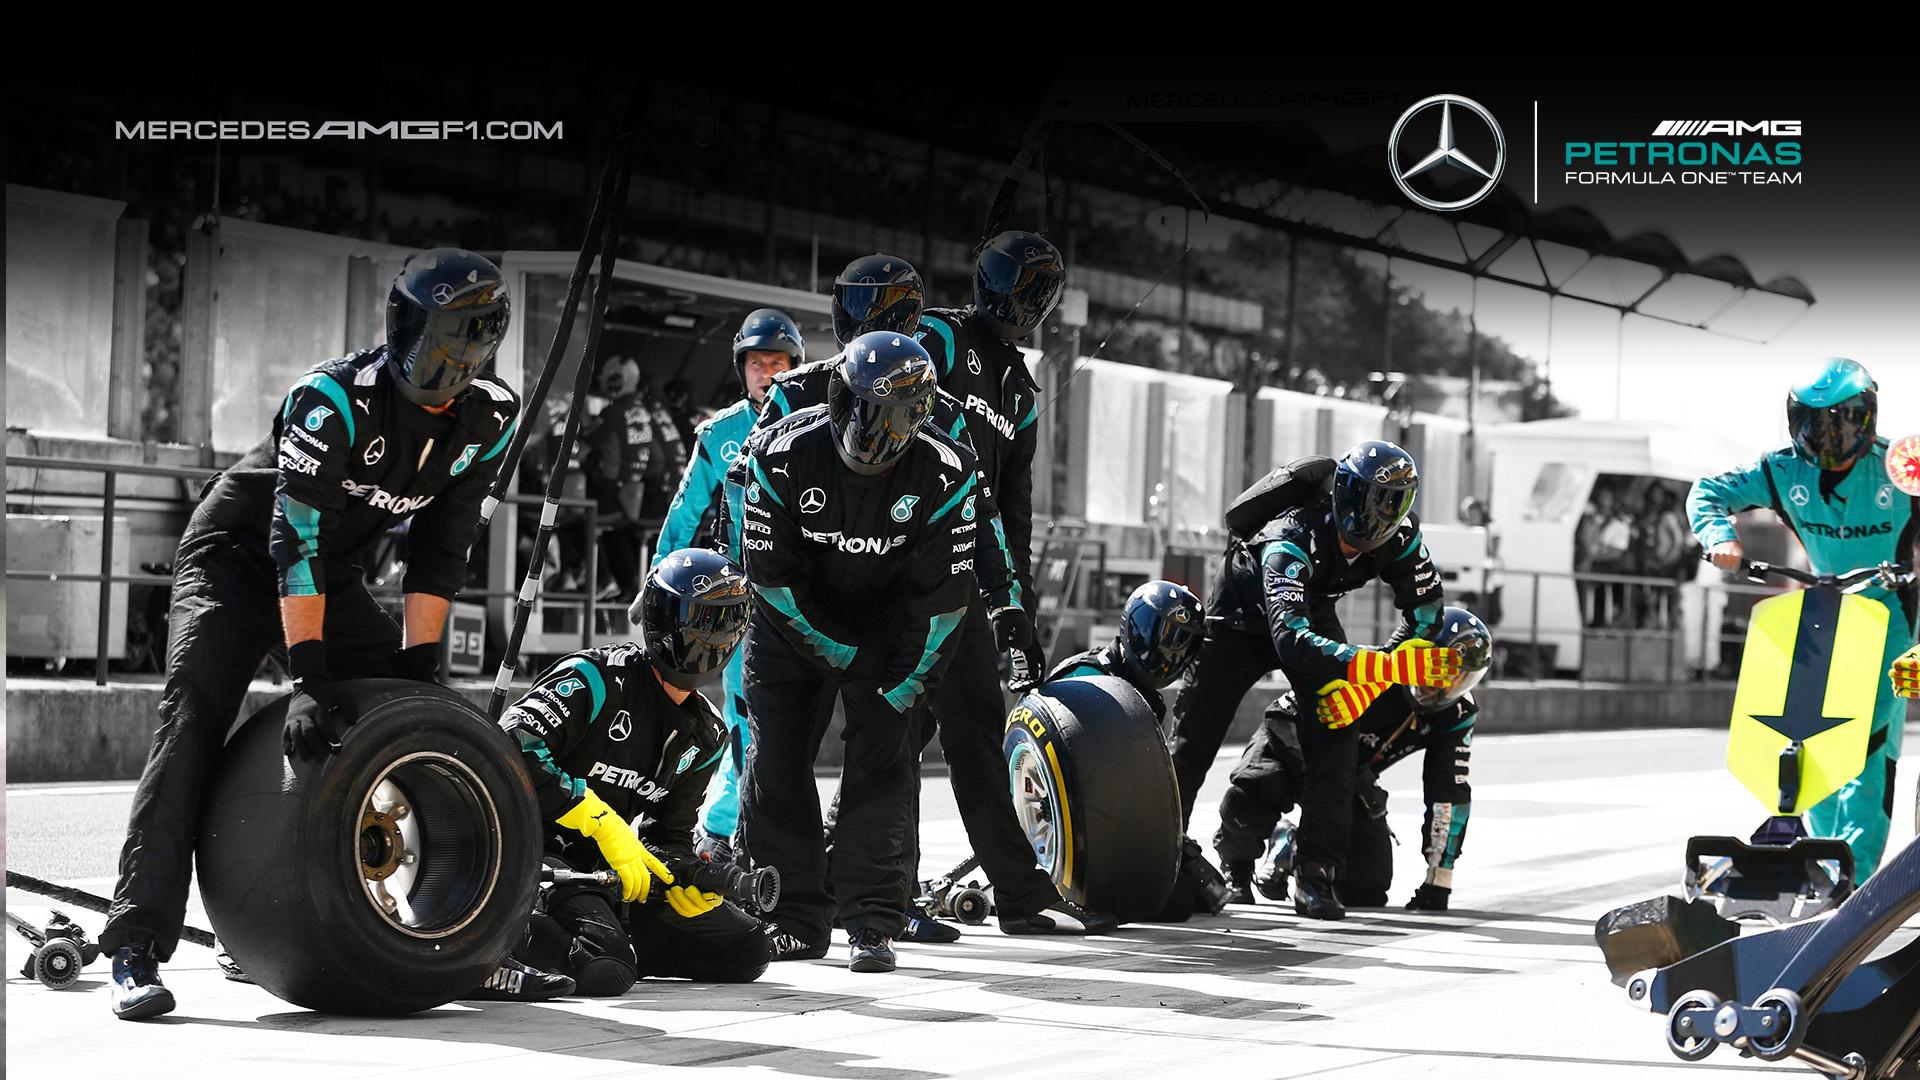 Mercedes AMG PETRONAS F1 Team Wallpaper Available NOW! Full Range Of Image And Resolutions Right Here > #F1